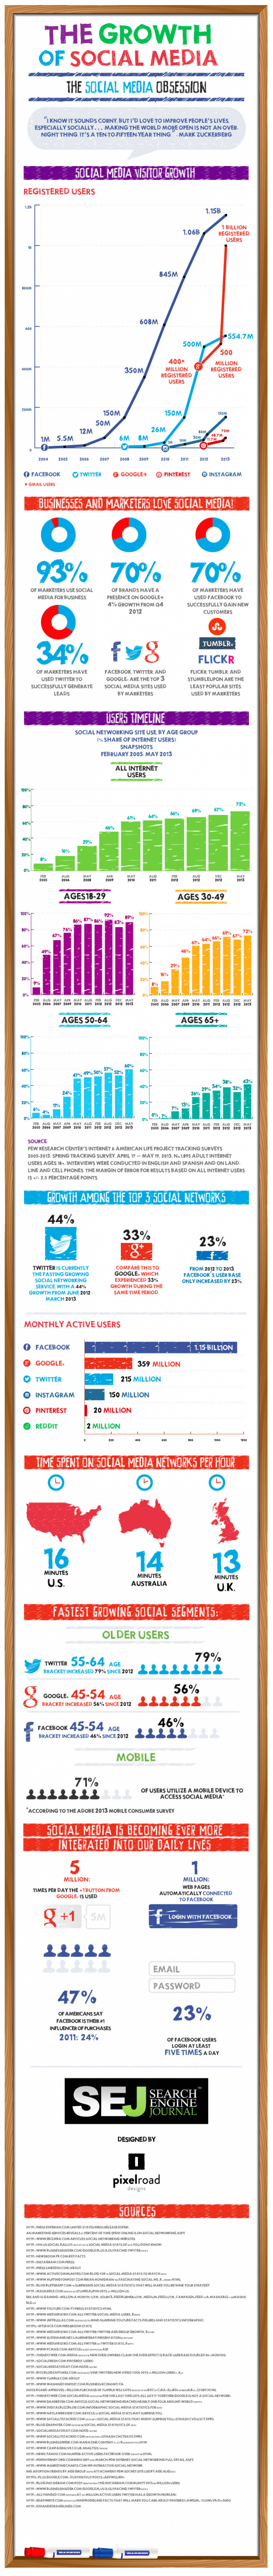 The Growth of Social Media v2.0 [INFOGRAPHIC]